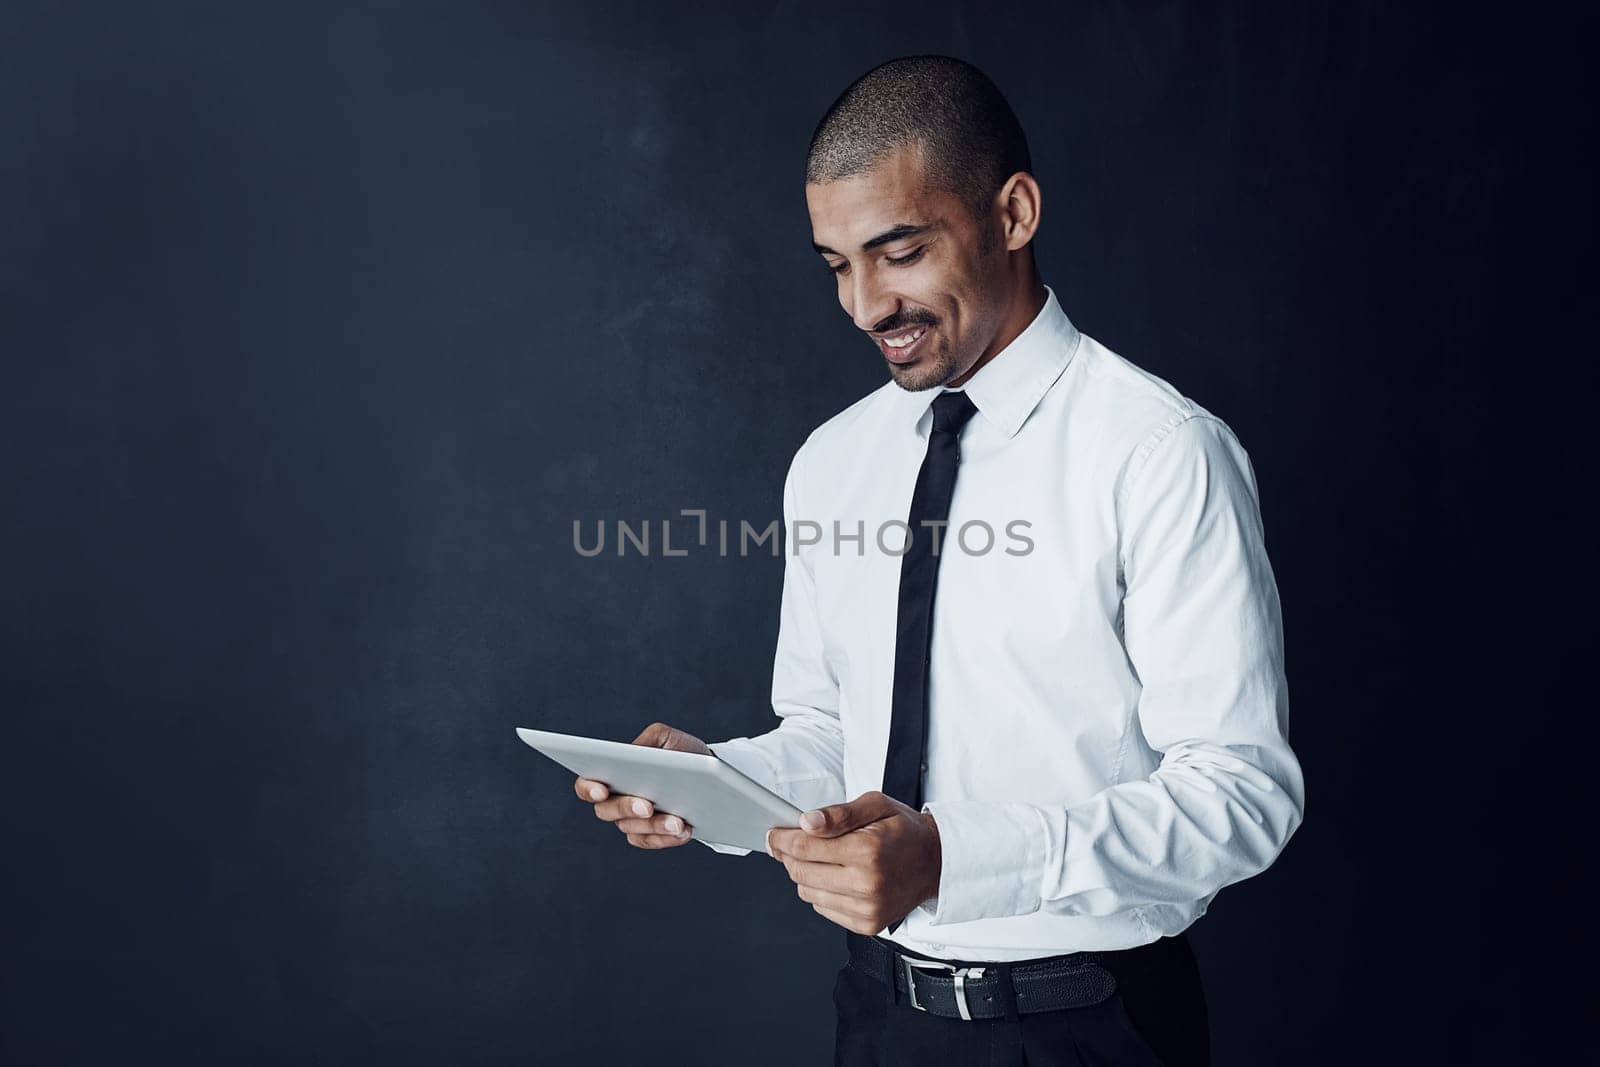 Equipped with smart tools for optimum productivity. Studio shot of a young businessman using a digital tablet against a dark background